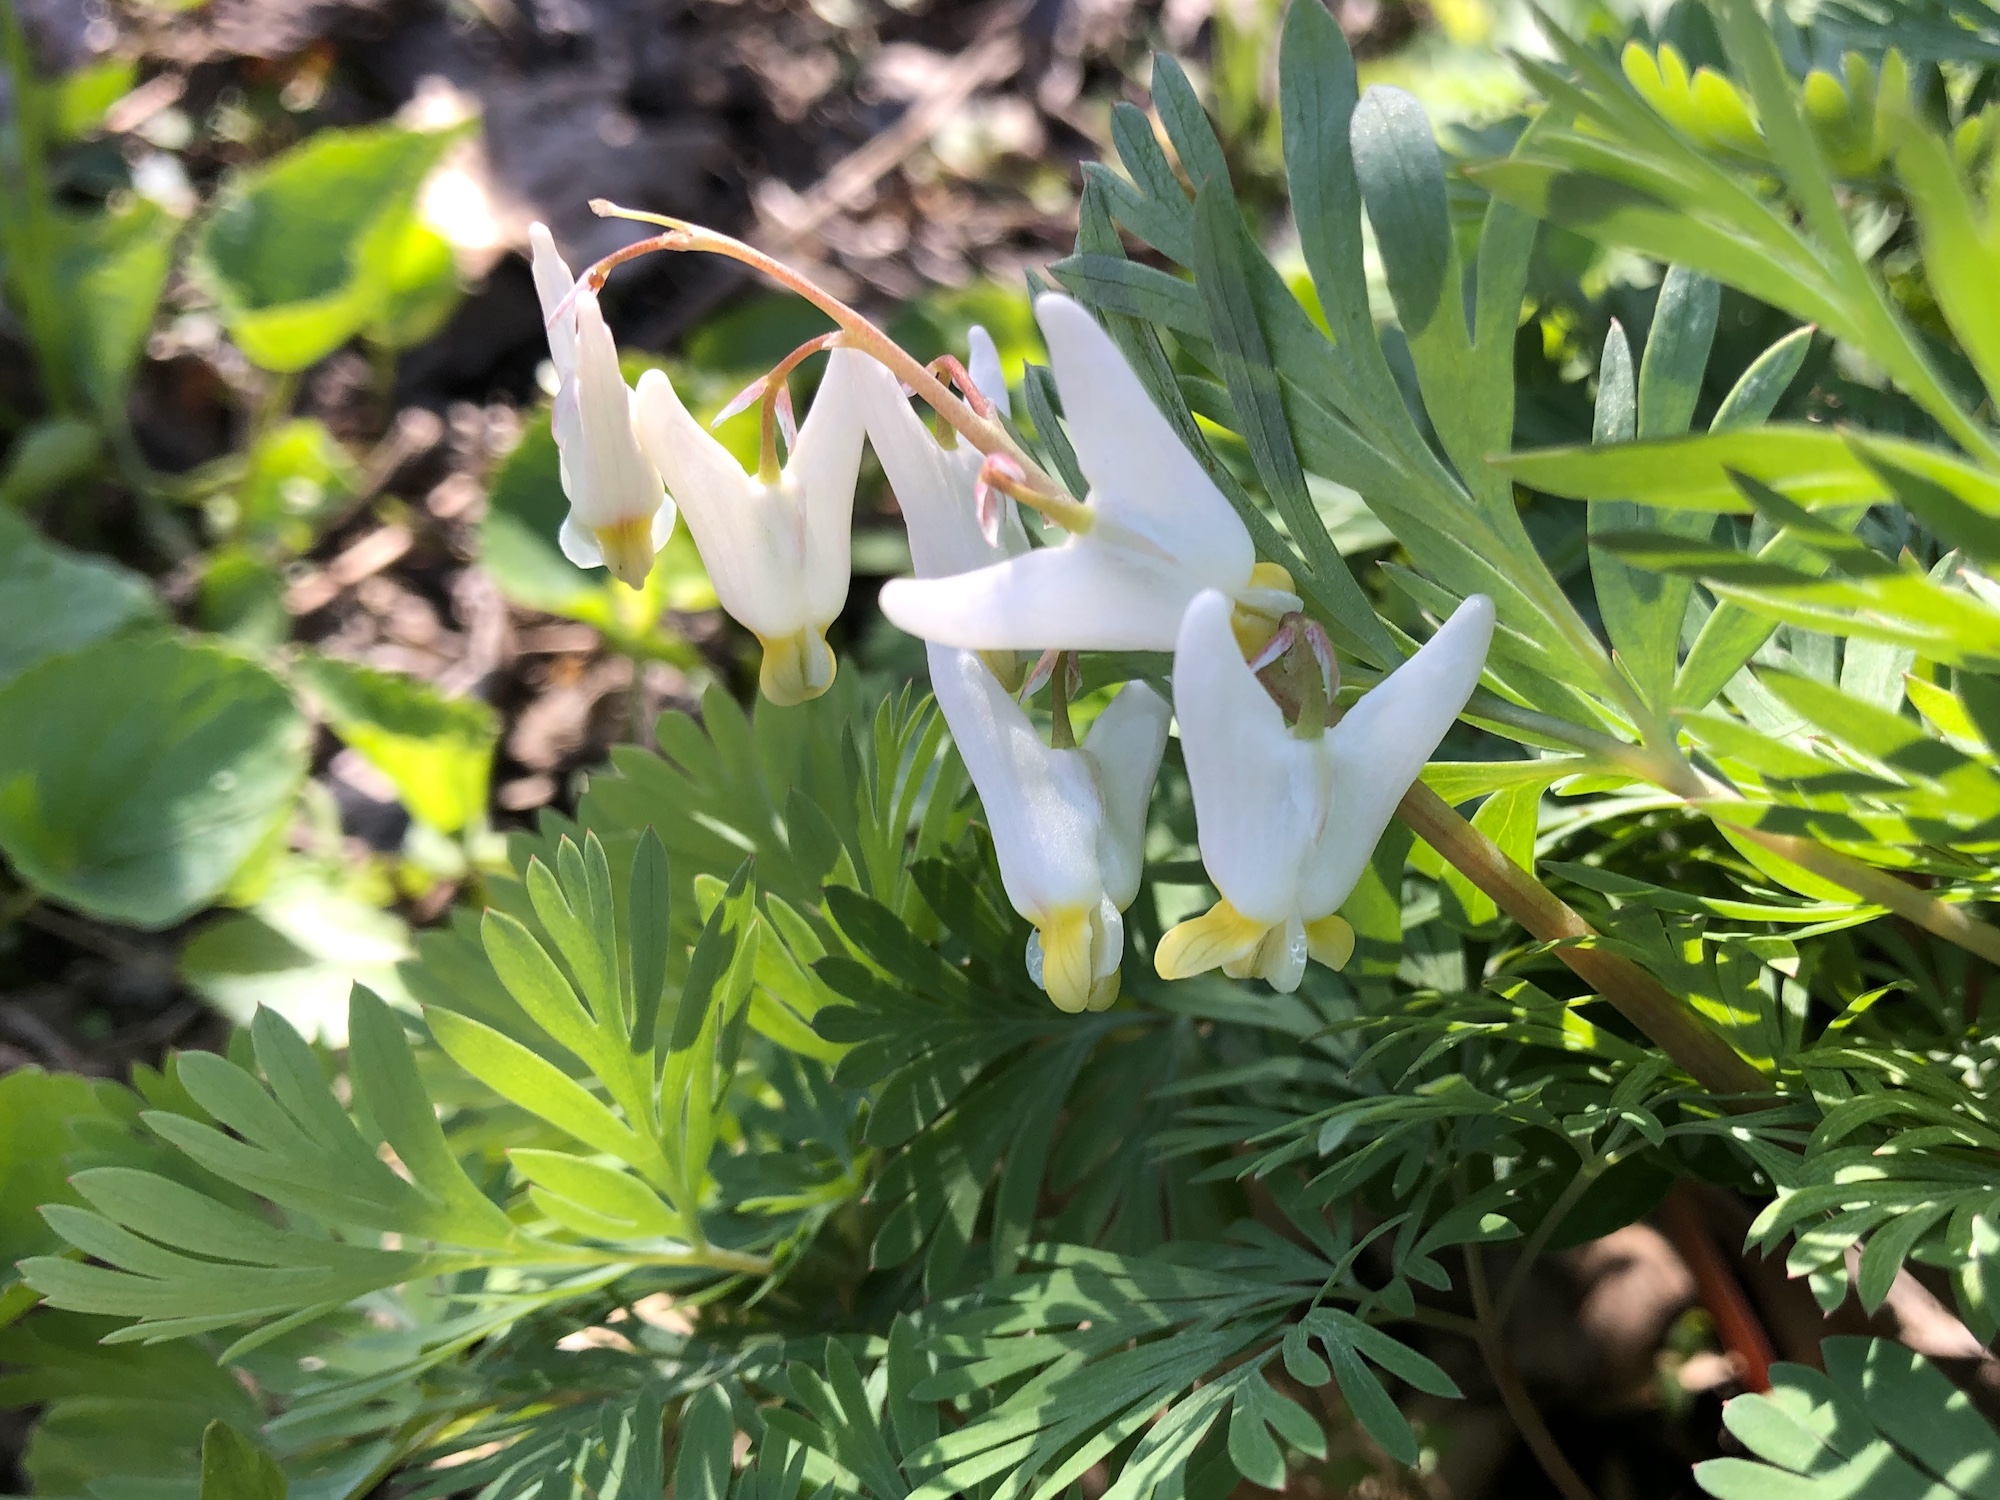 Dutchman's Breeches by Duck Pond on April 22, 2020.